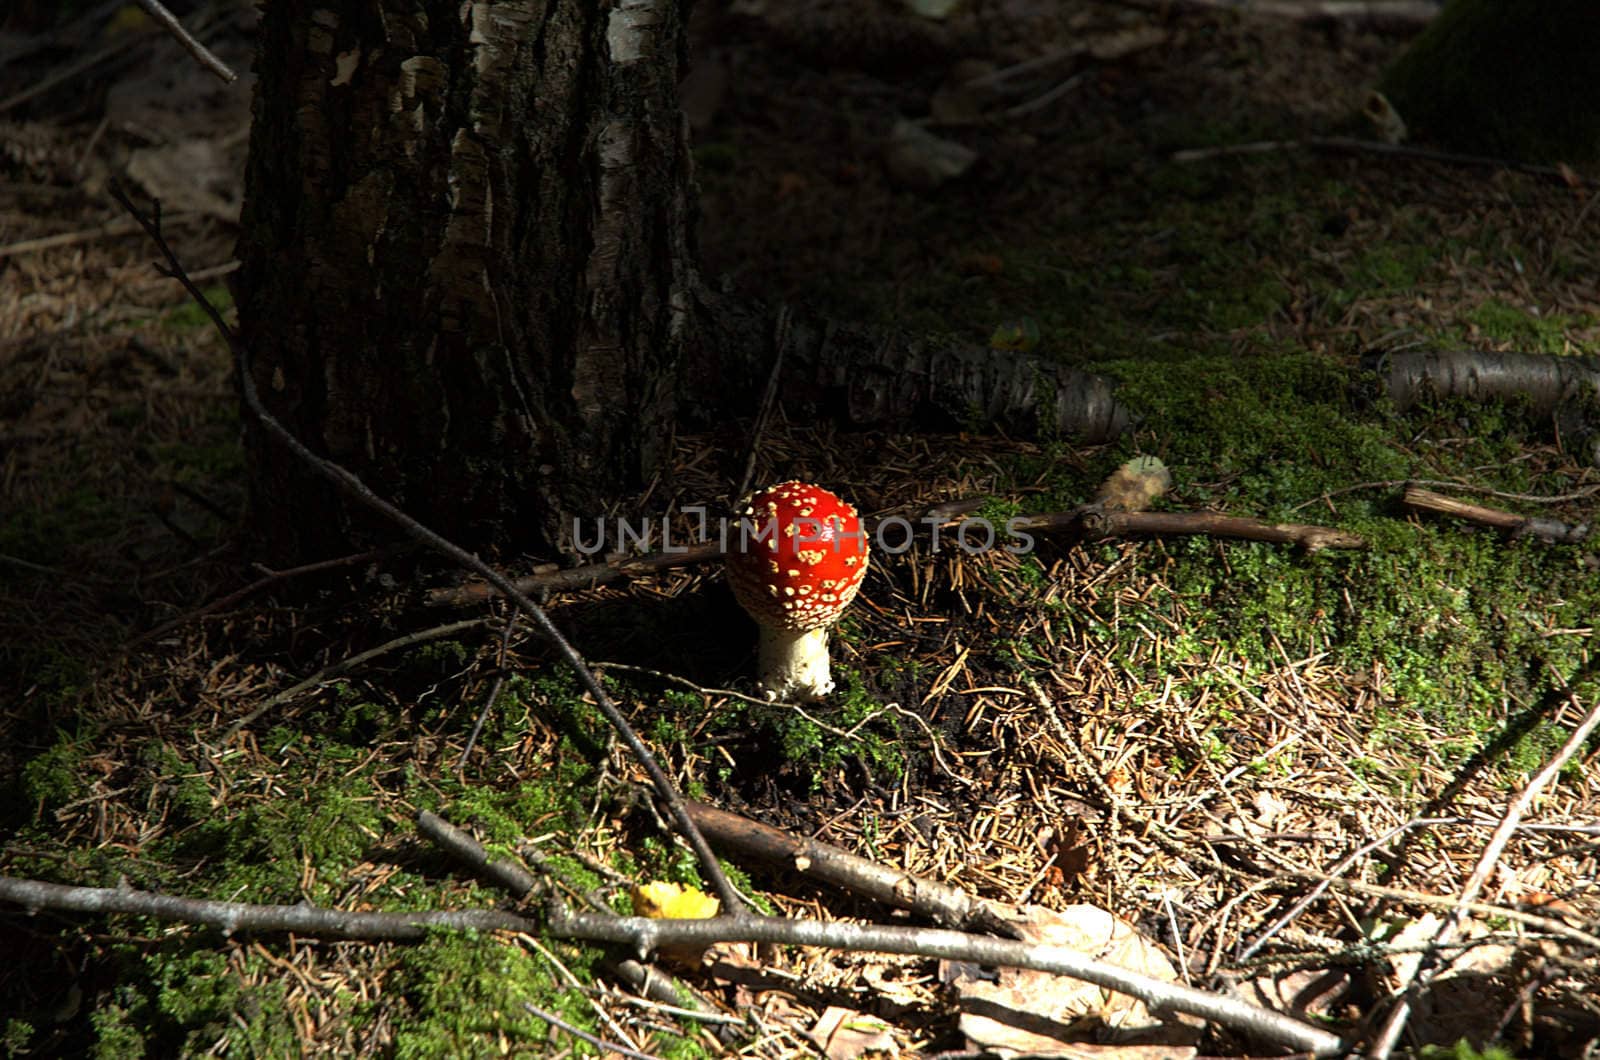 Young fly agaric mushroom next to tree in sunlit forest